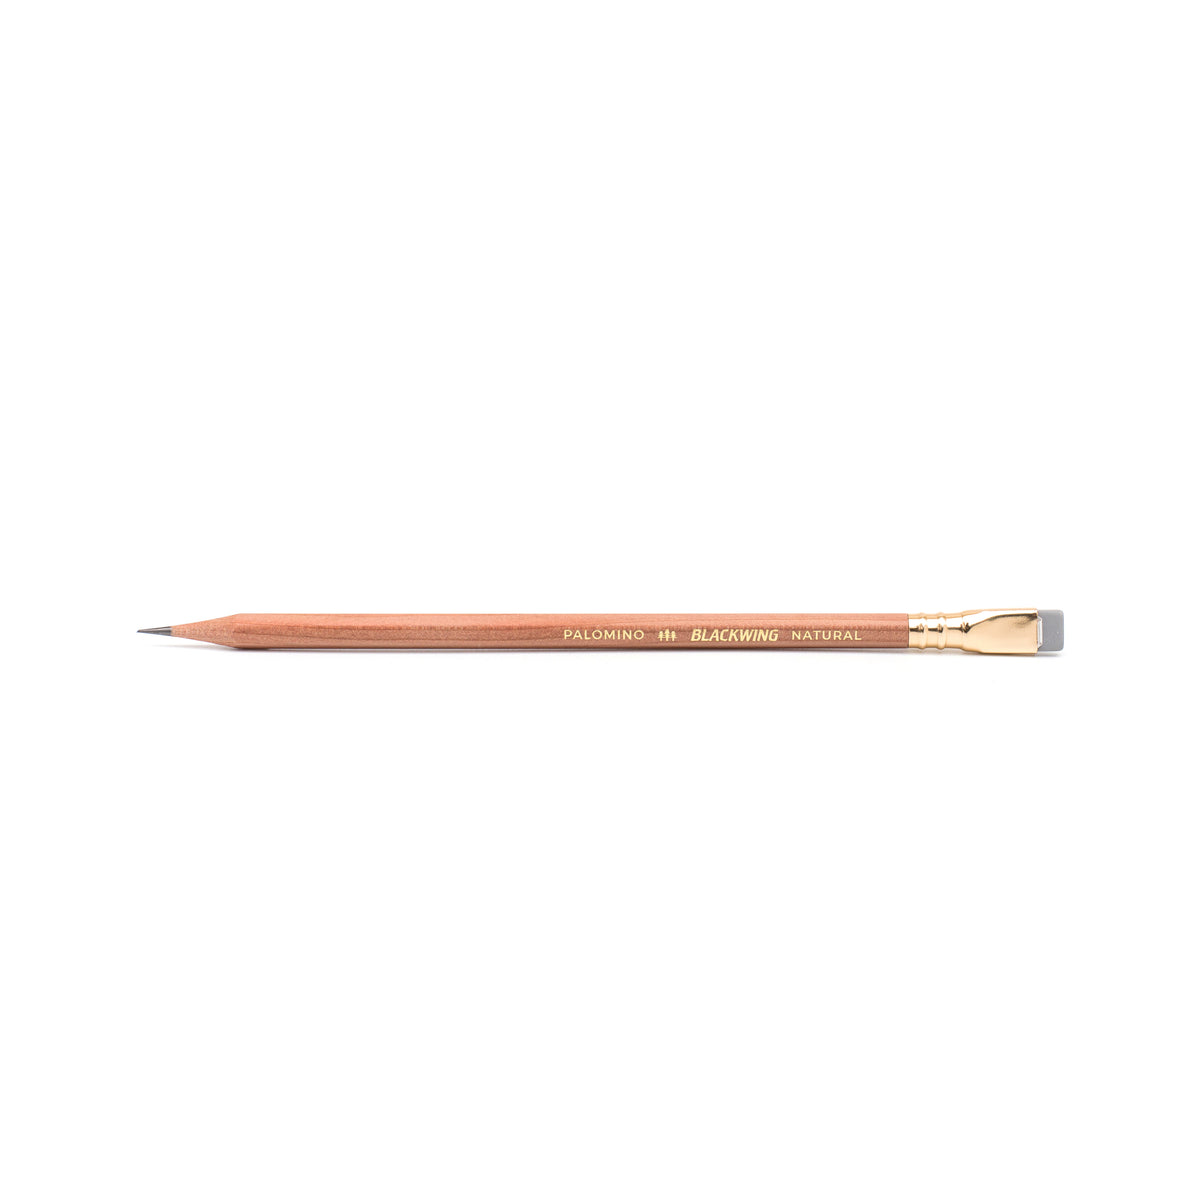 A Blackwing Natural (set of 12) with an Incense-cedar barrel on a white background.